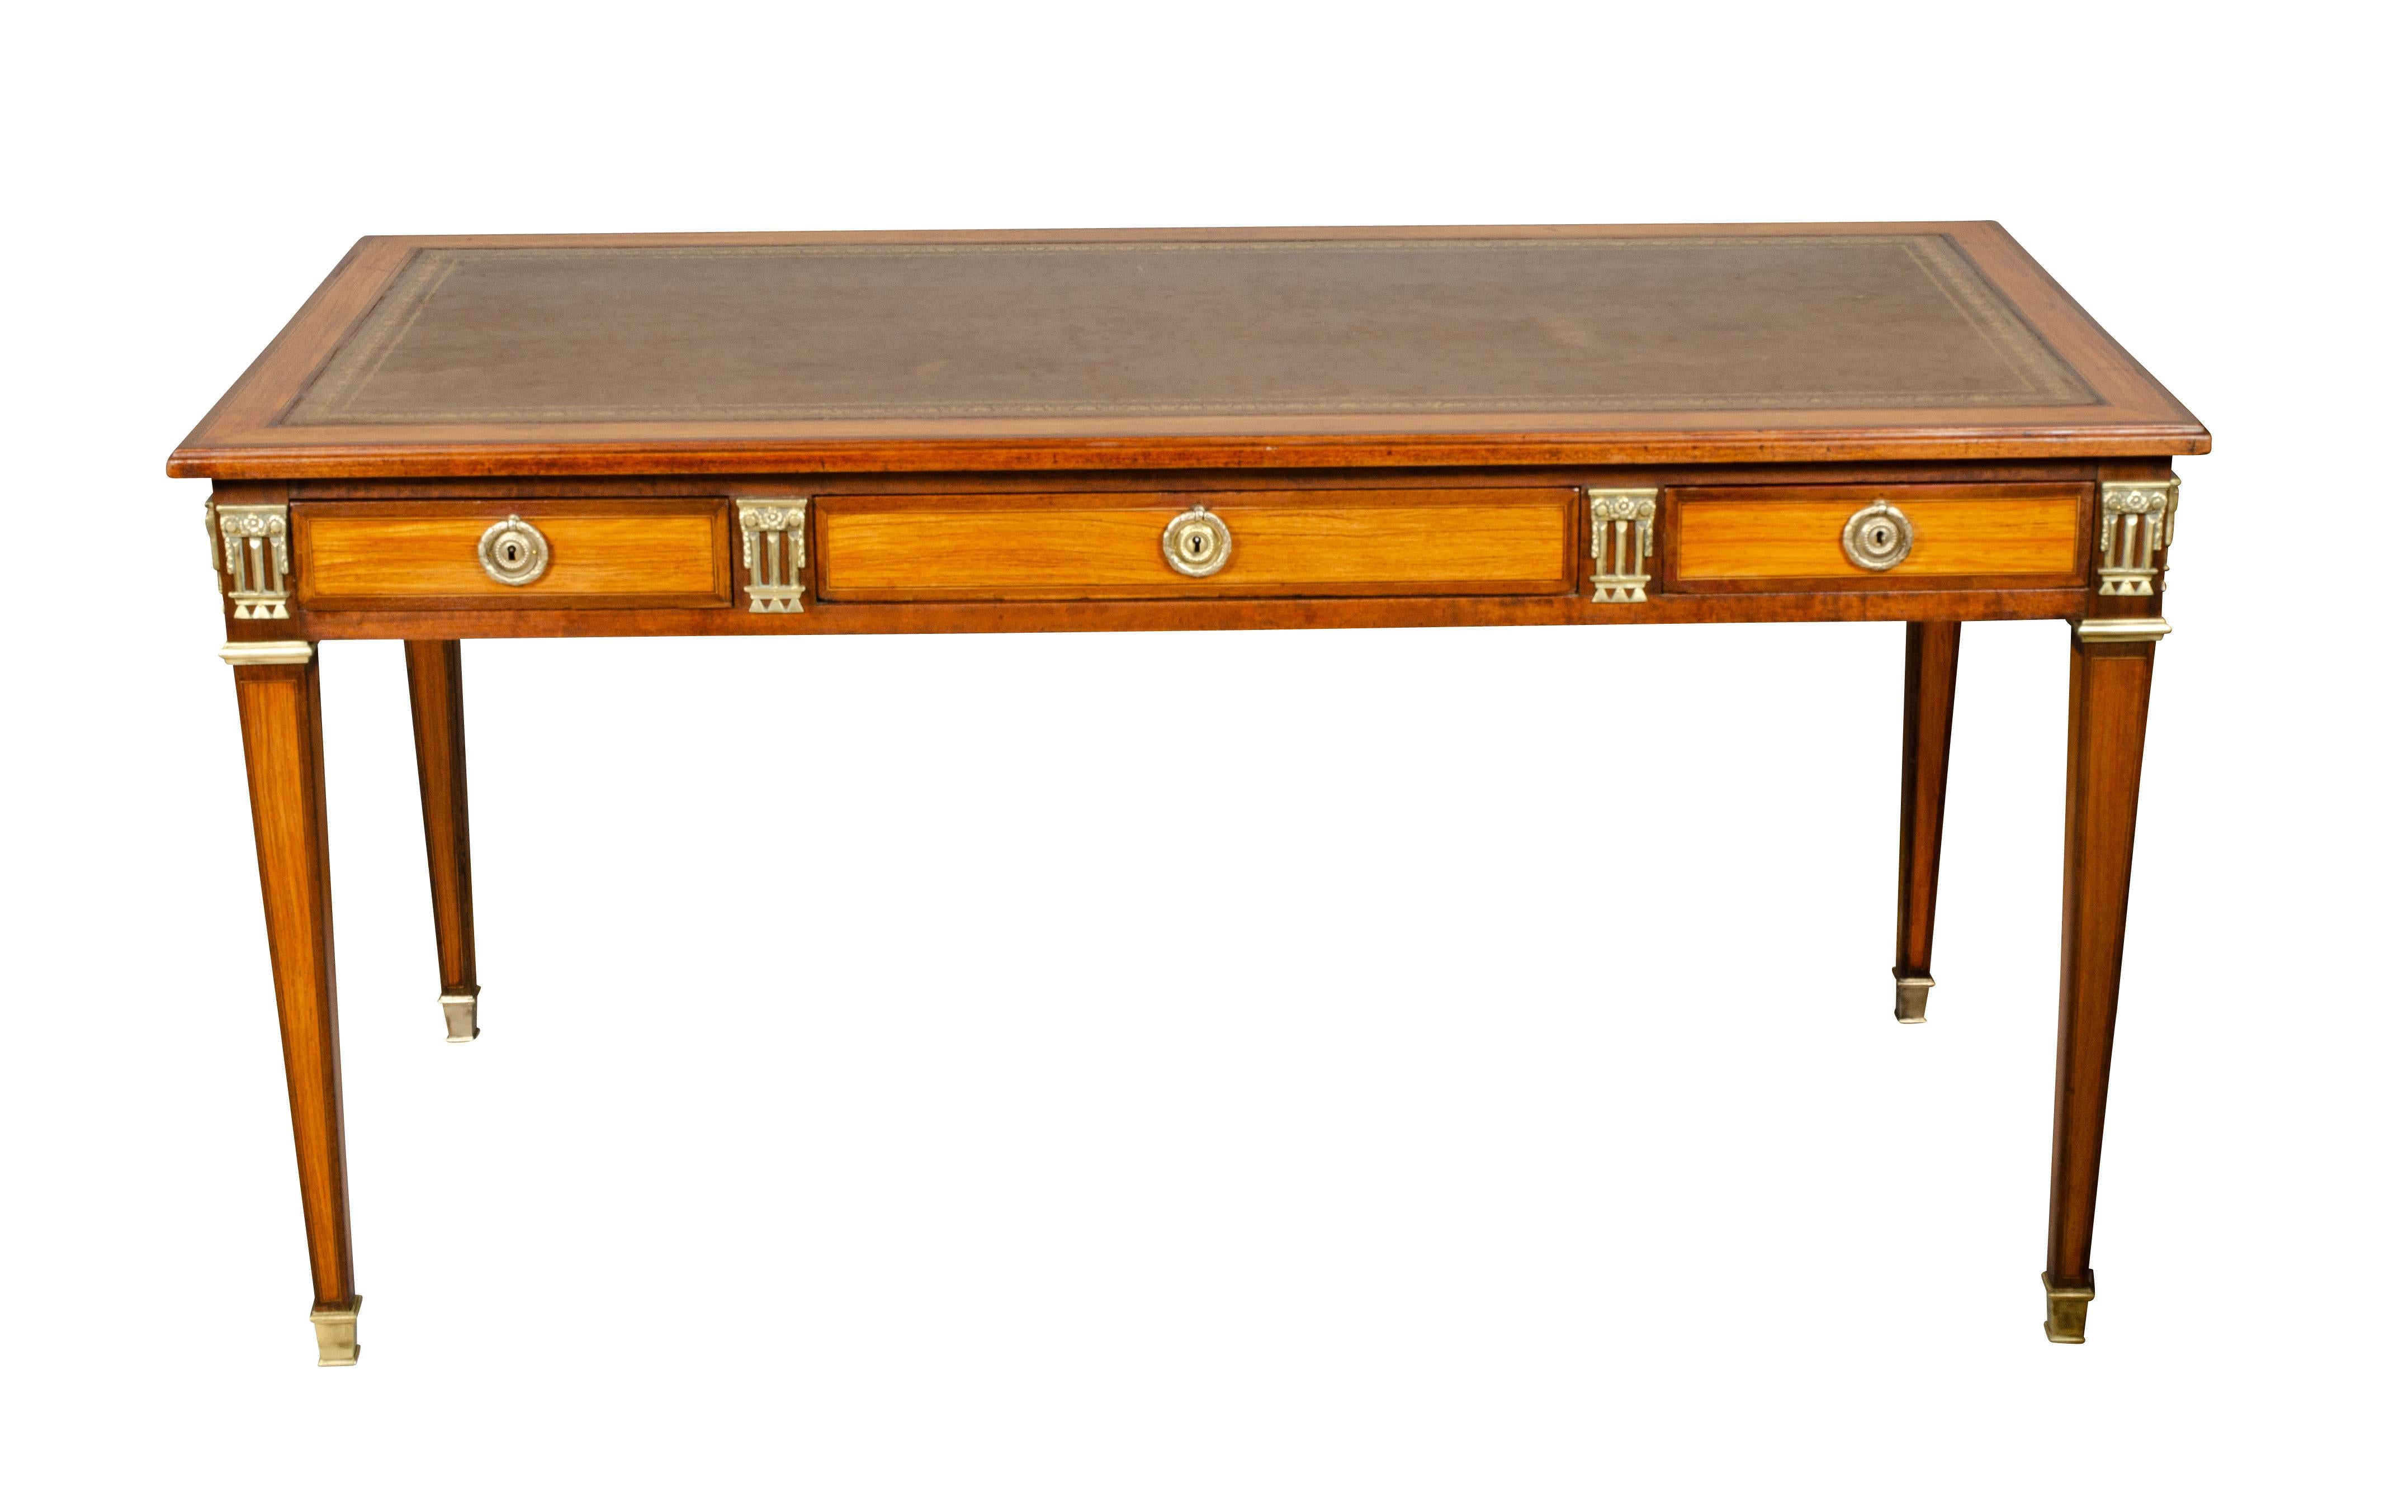 Original to the Waldorf Towers in New York City with metal tag and serial number on back. New tooled brown leather top set within an inlaid border over three drawers with flanking bronze mounts raised on square tapered legs. Back finished so can